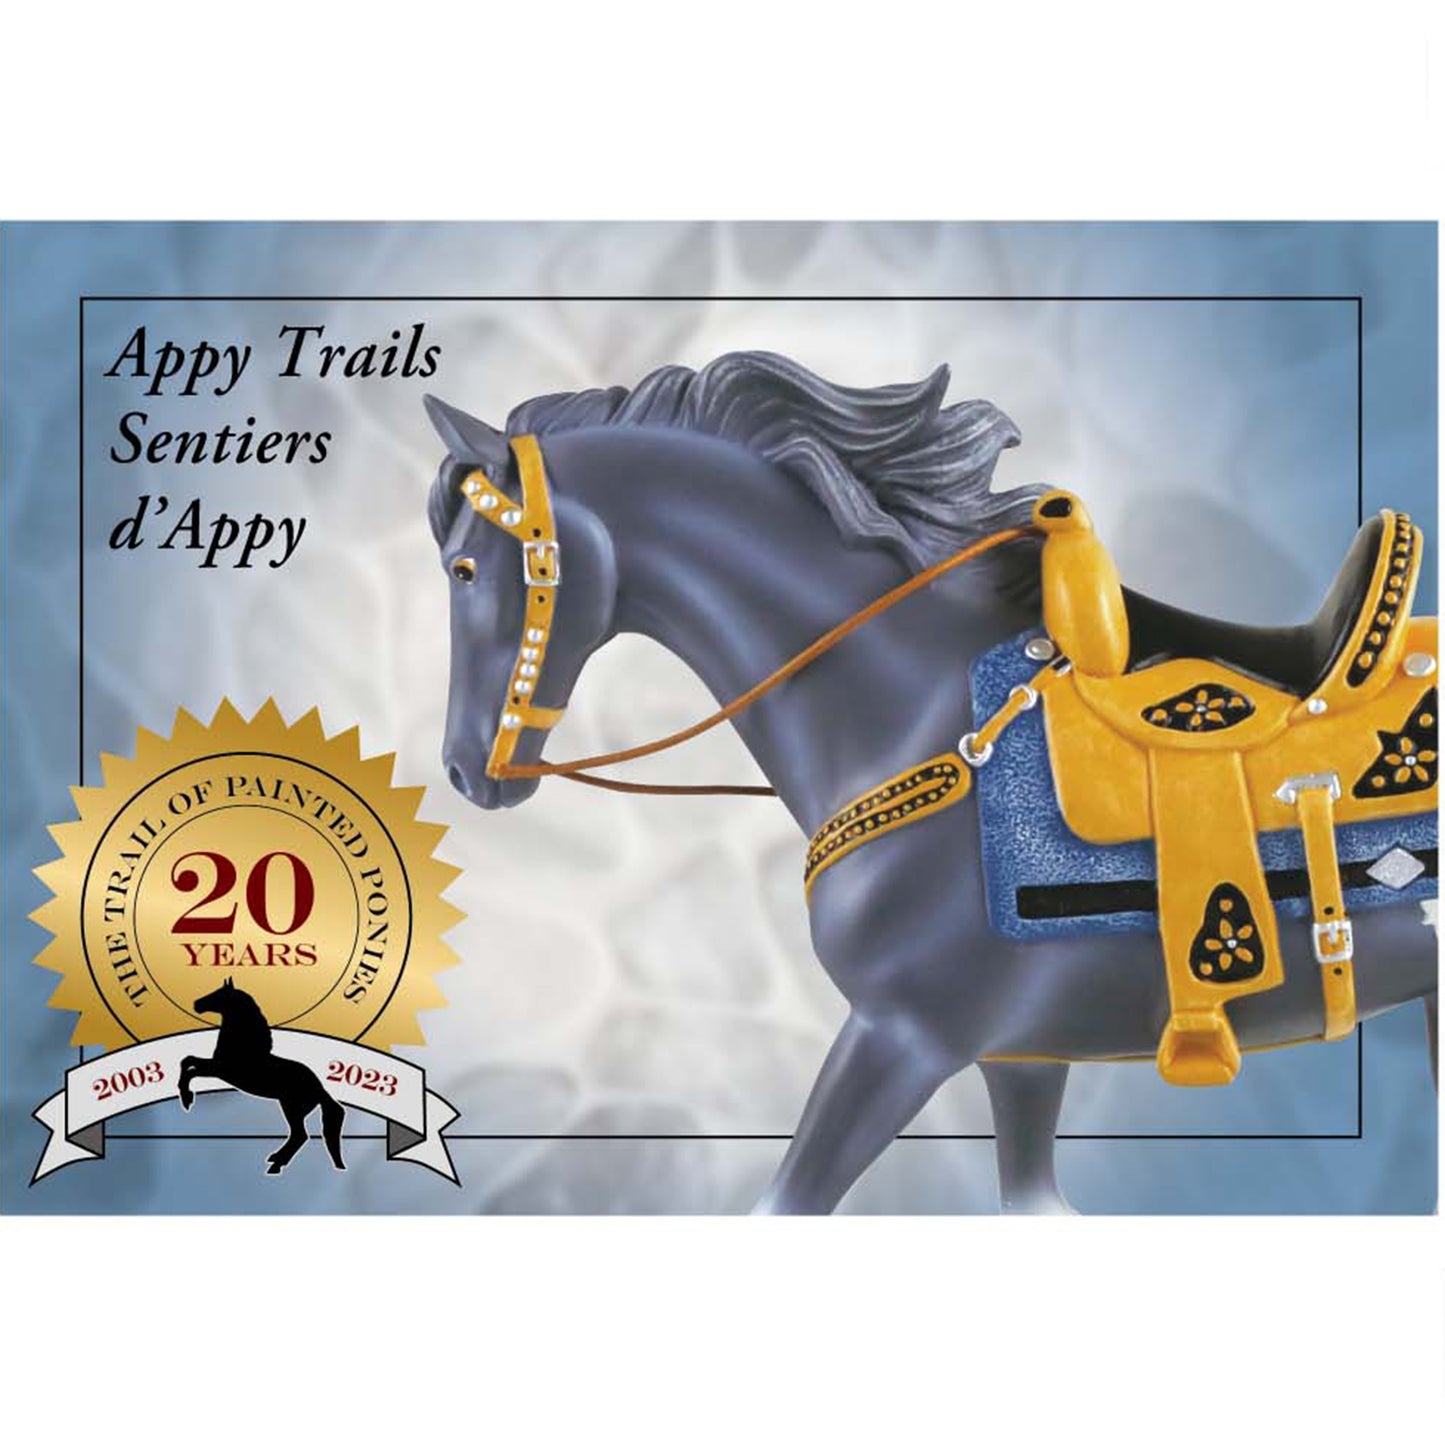 Appy Trails - Standard Edition